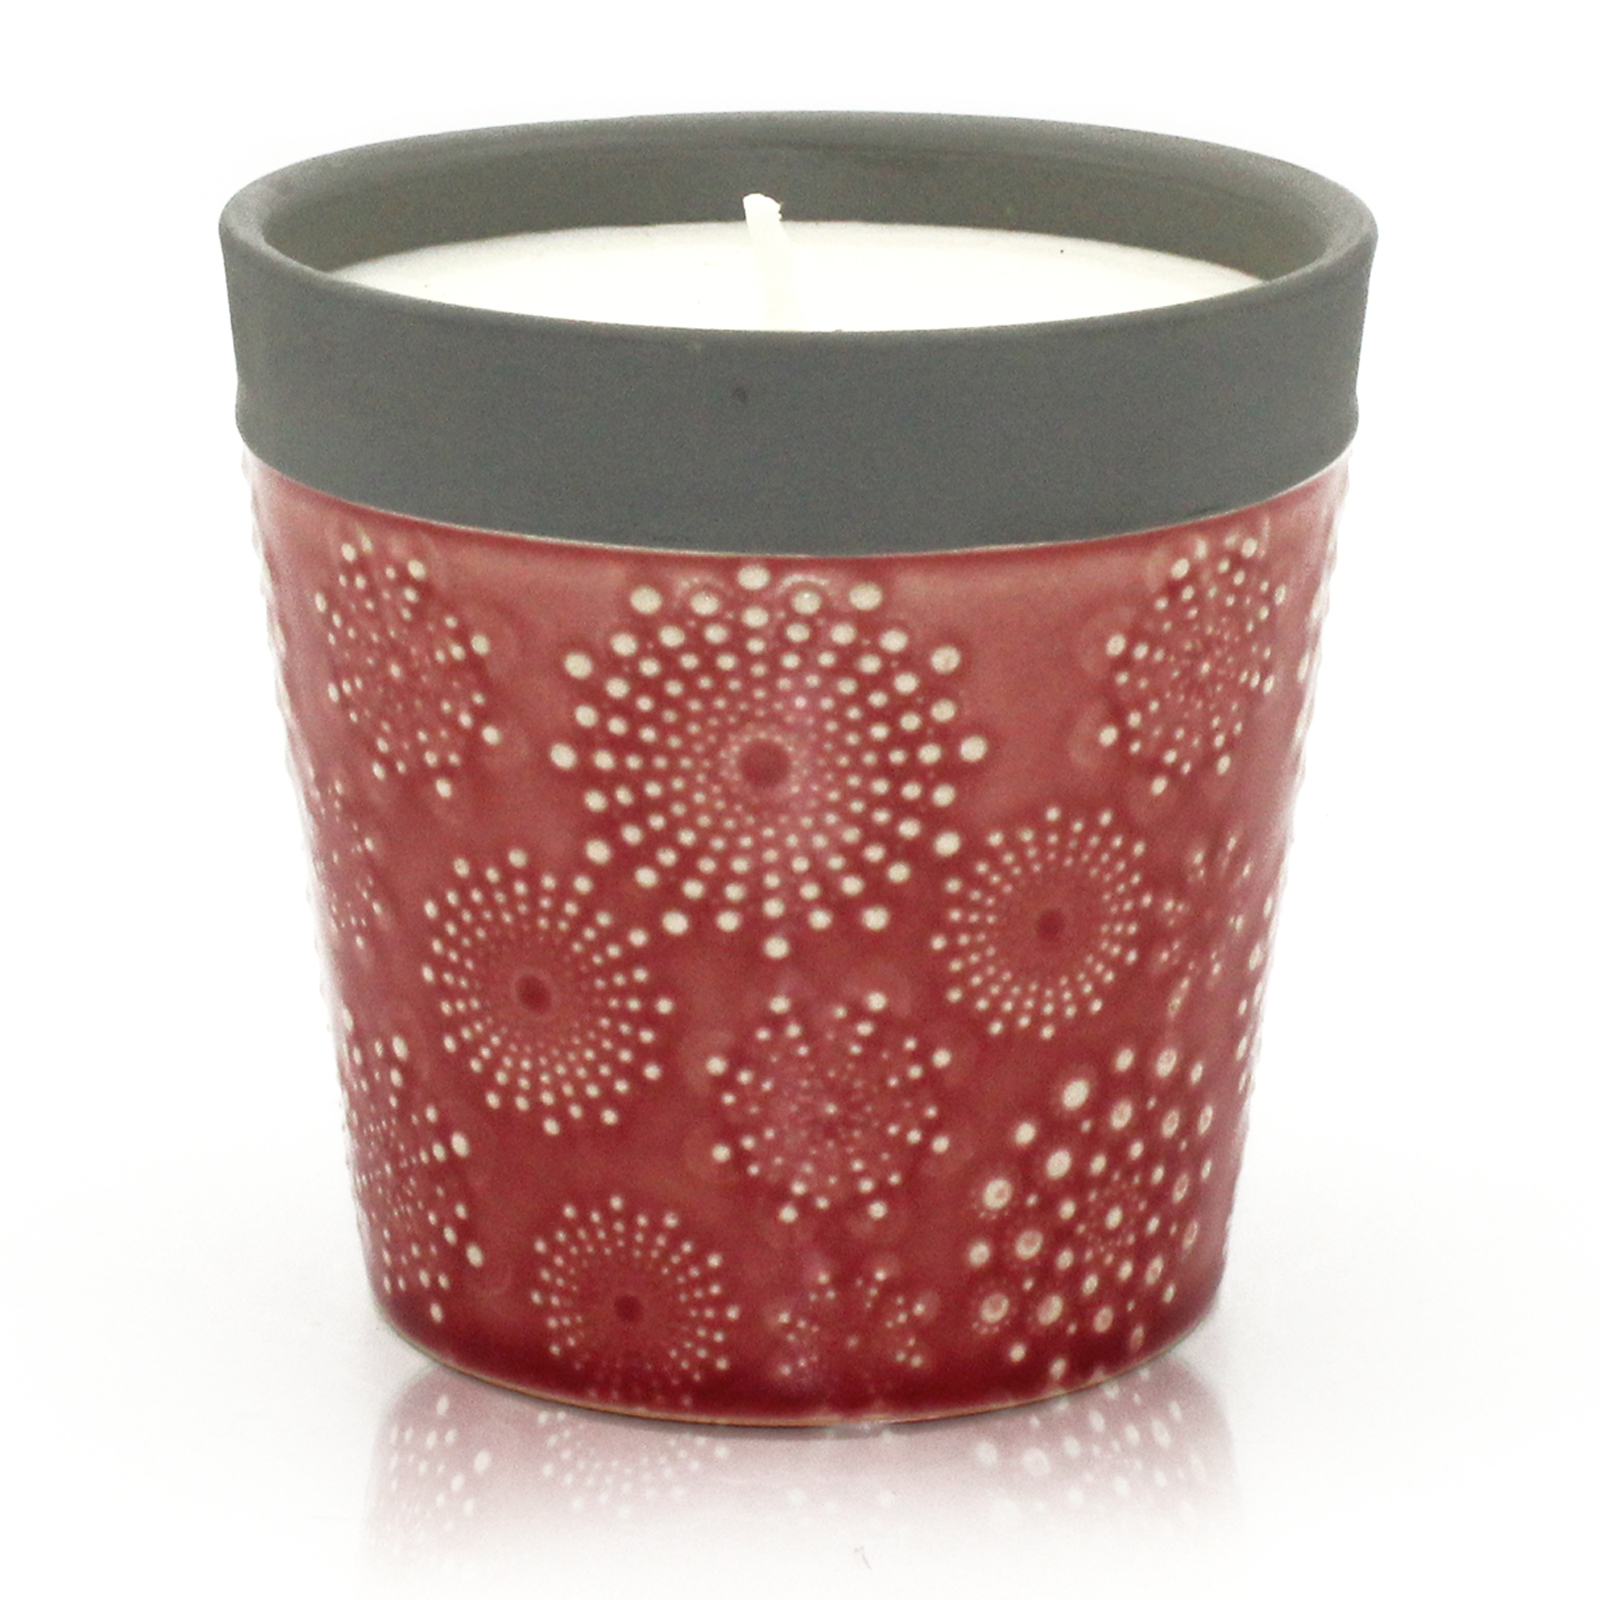 Home is Home Candle Pot - Rambling Rose